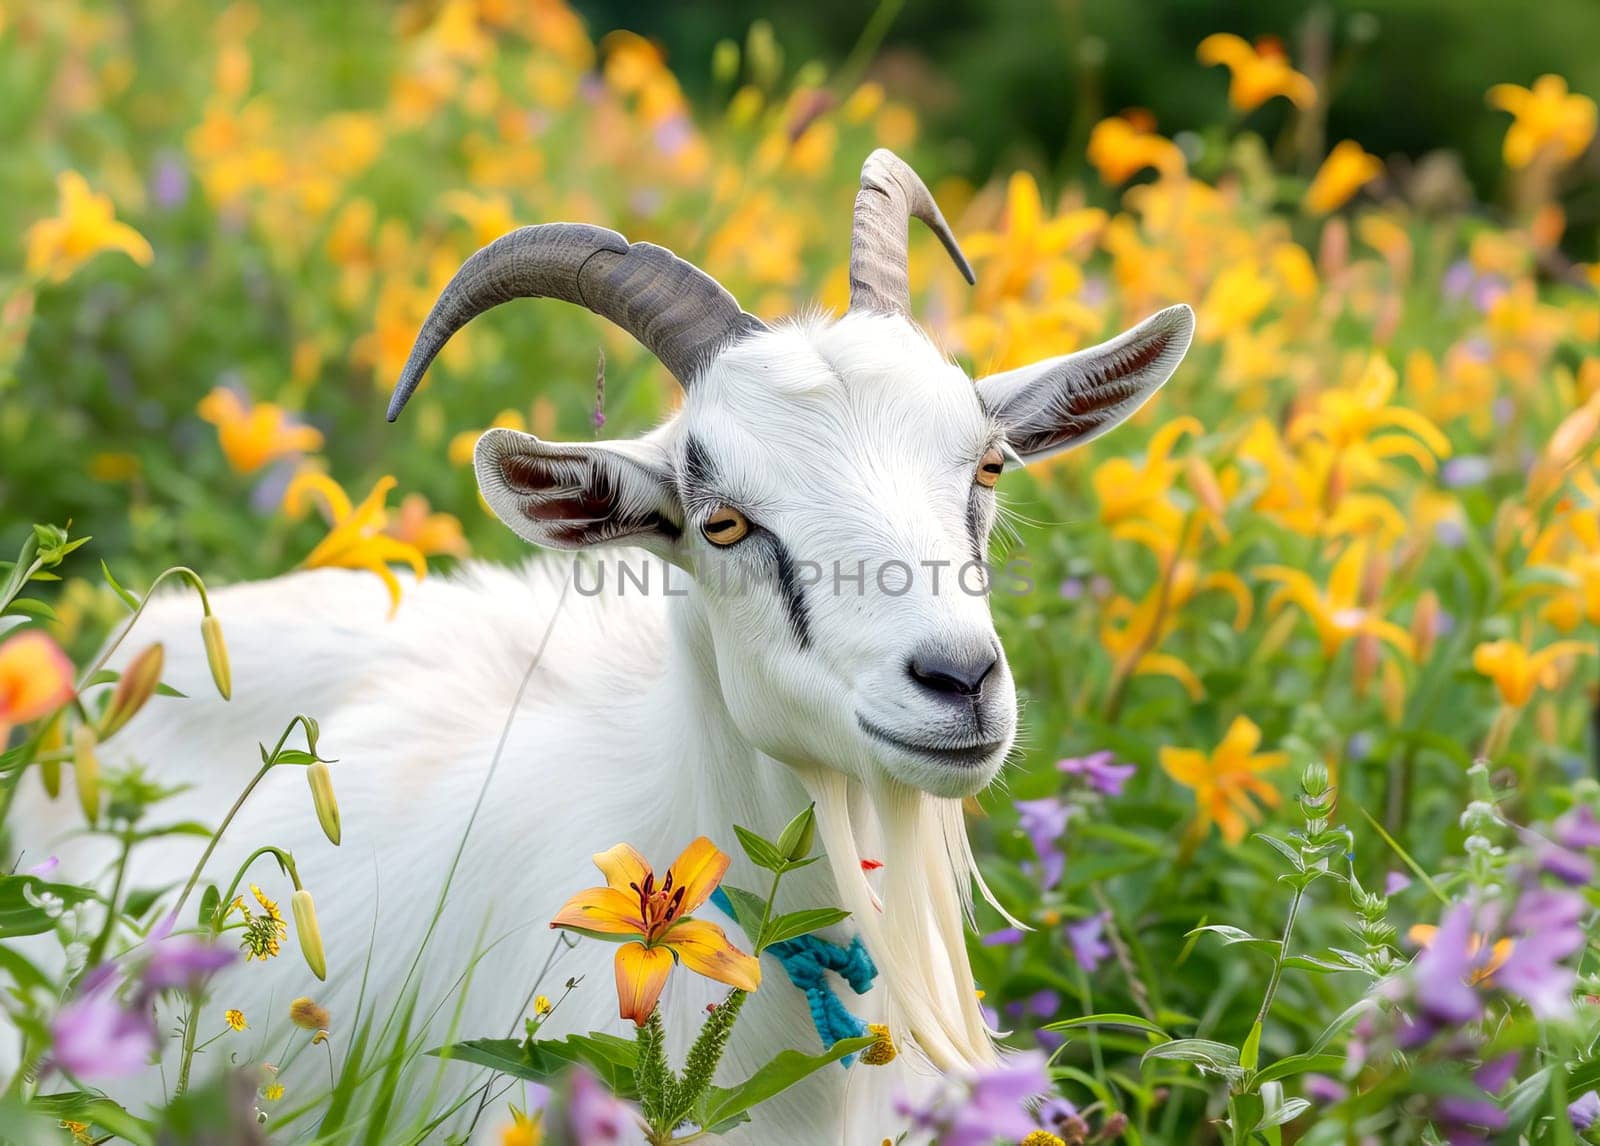 A white goat with long horns grazes in a meadow surrounded by wildflowers. by OlgaGubskaya